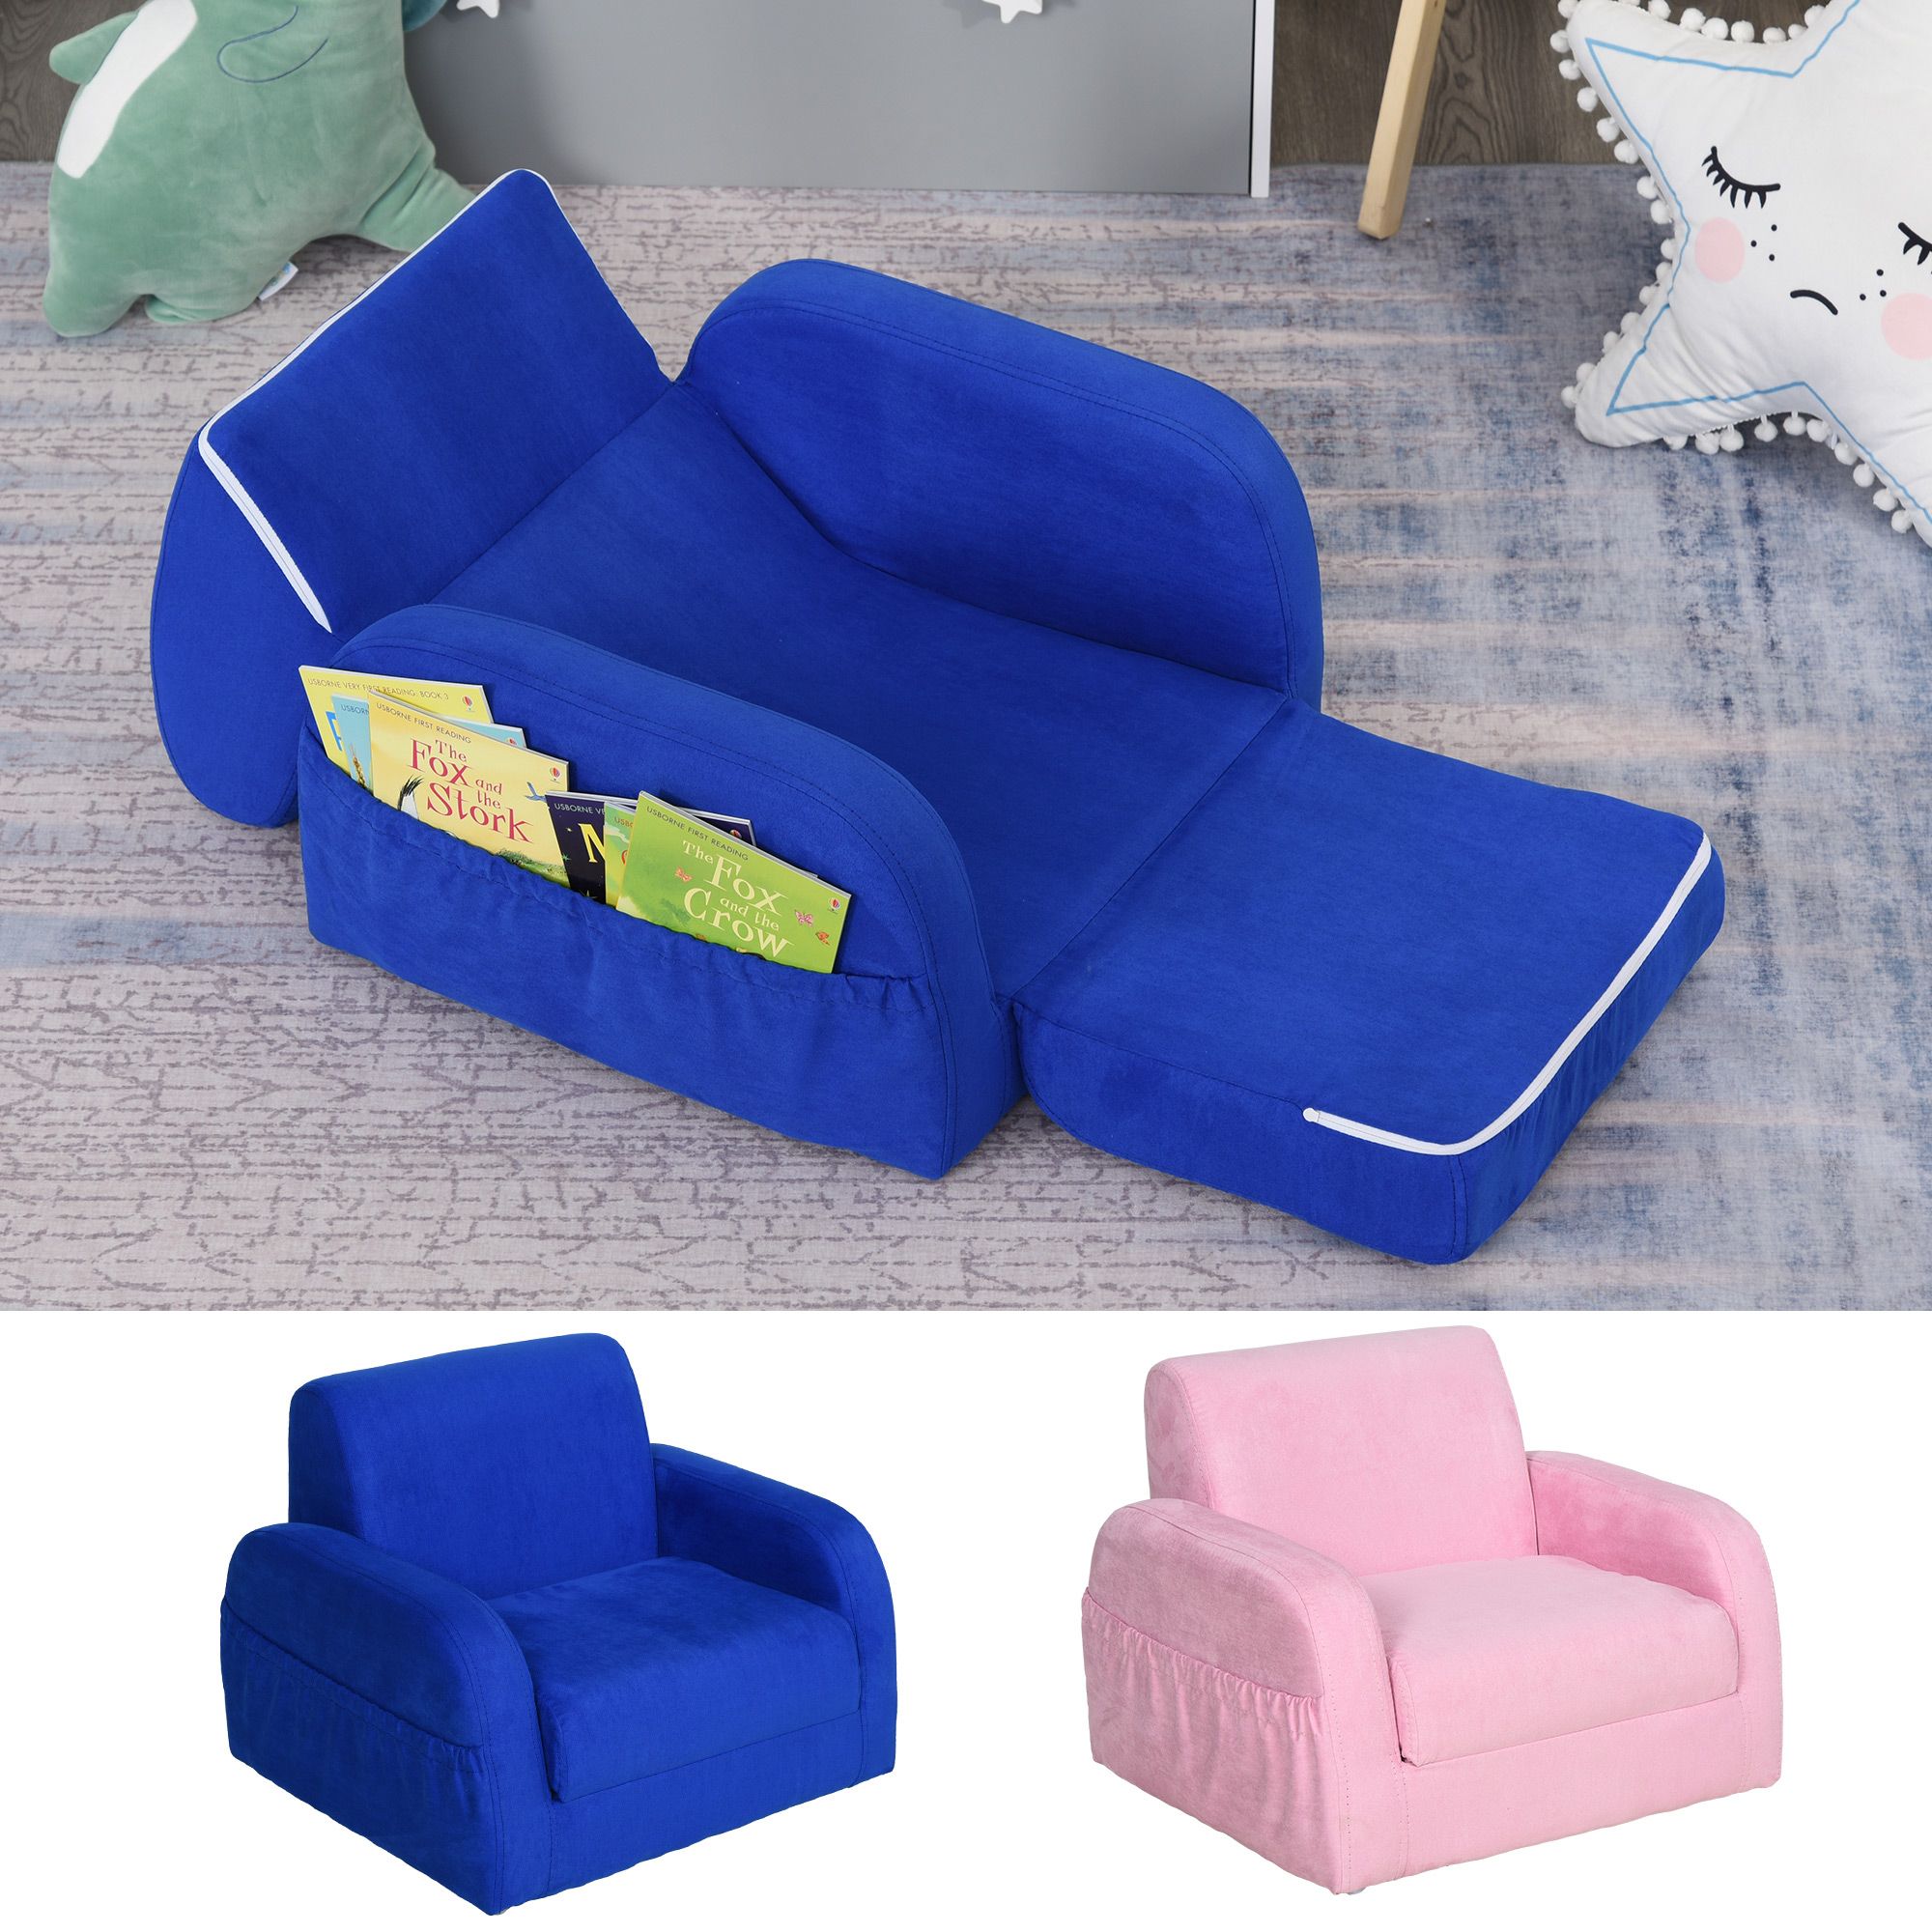 2 In 1 Kids Sofa Armchair Chair Fold Out Flip Open Baby Bed Couch With Regard To 2 In 1 Foldable Children's Sofa Beds (Gallery 1 of 20)